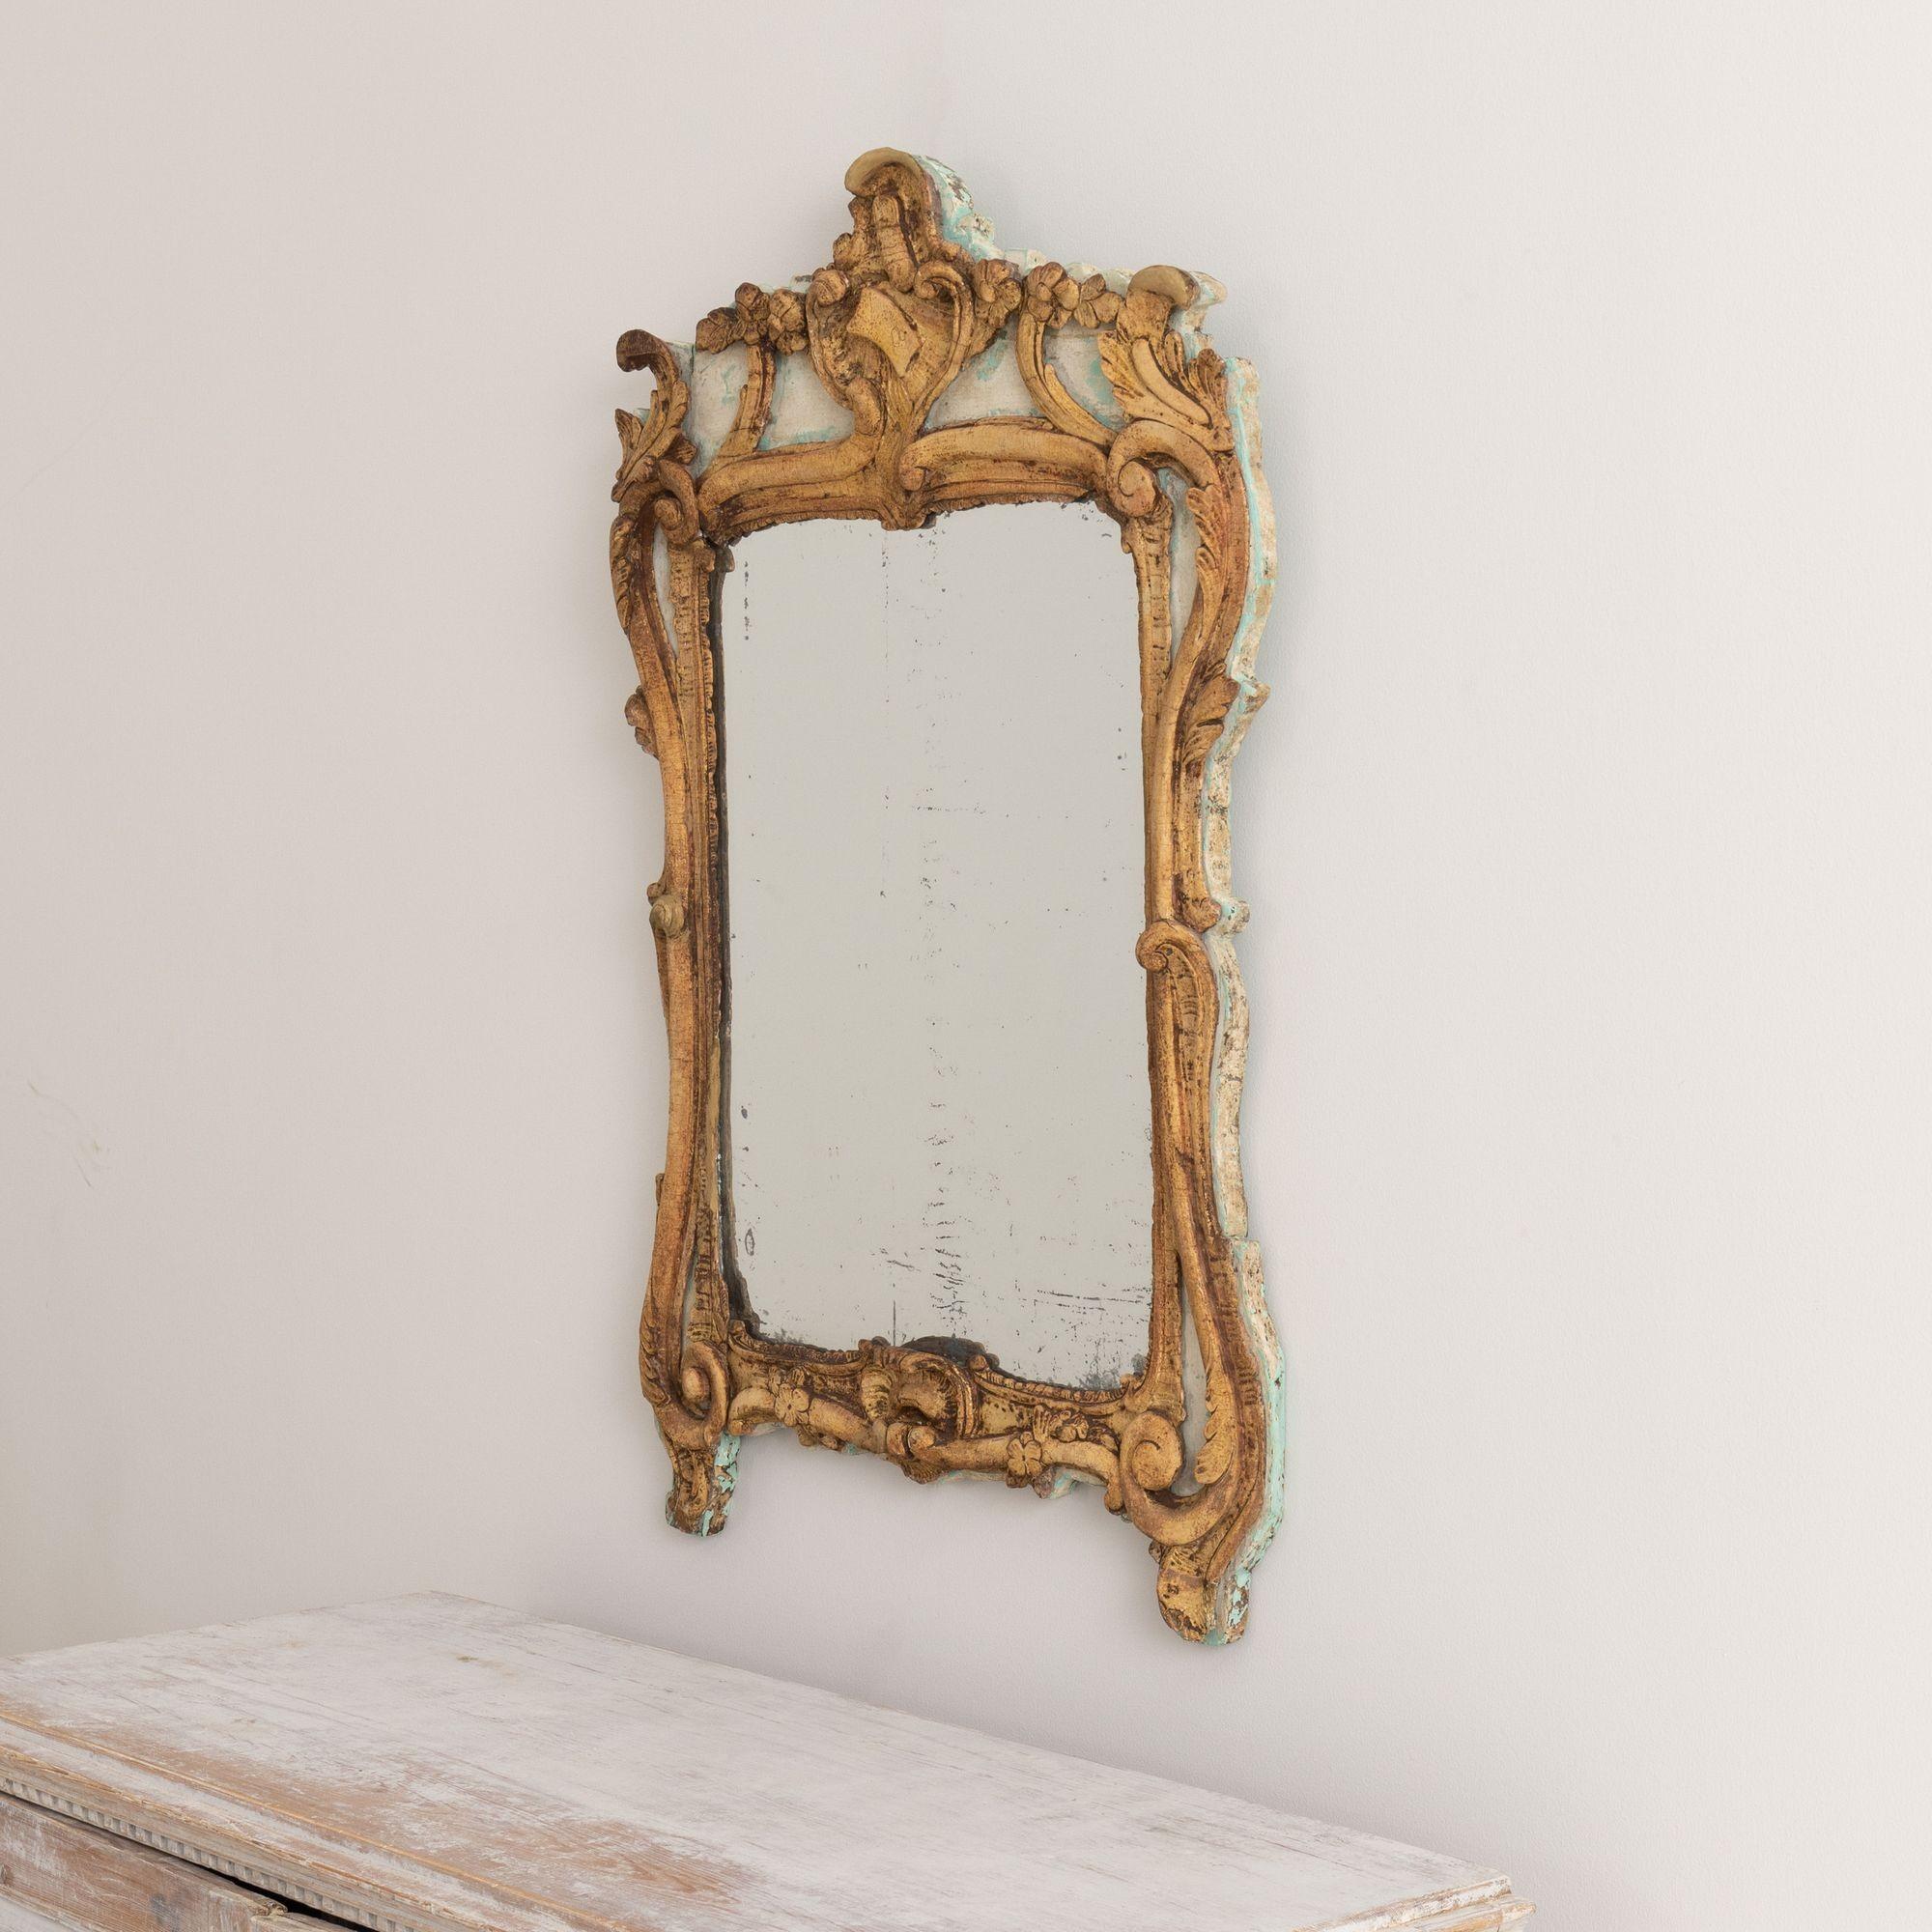 Hand-Carved 18th c. French Louis XV Period Giltwood Mirror with Original Mirror Plate